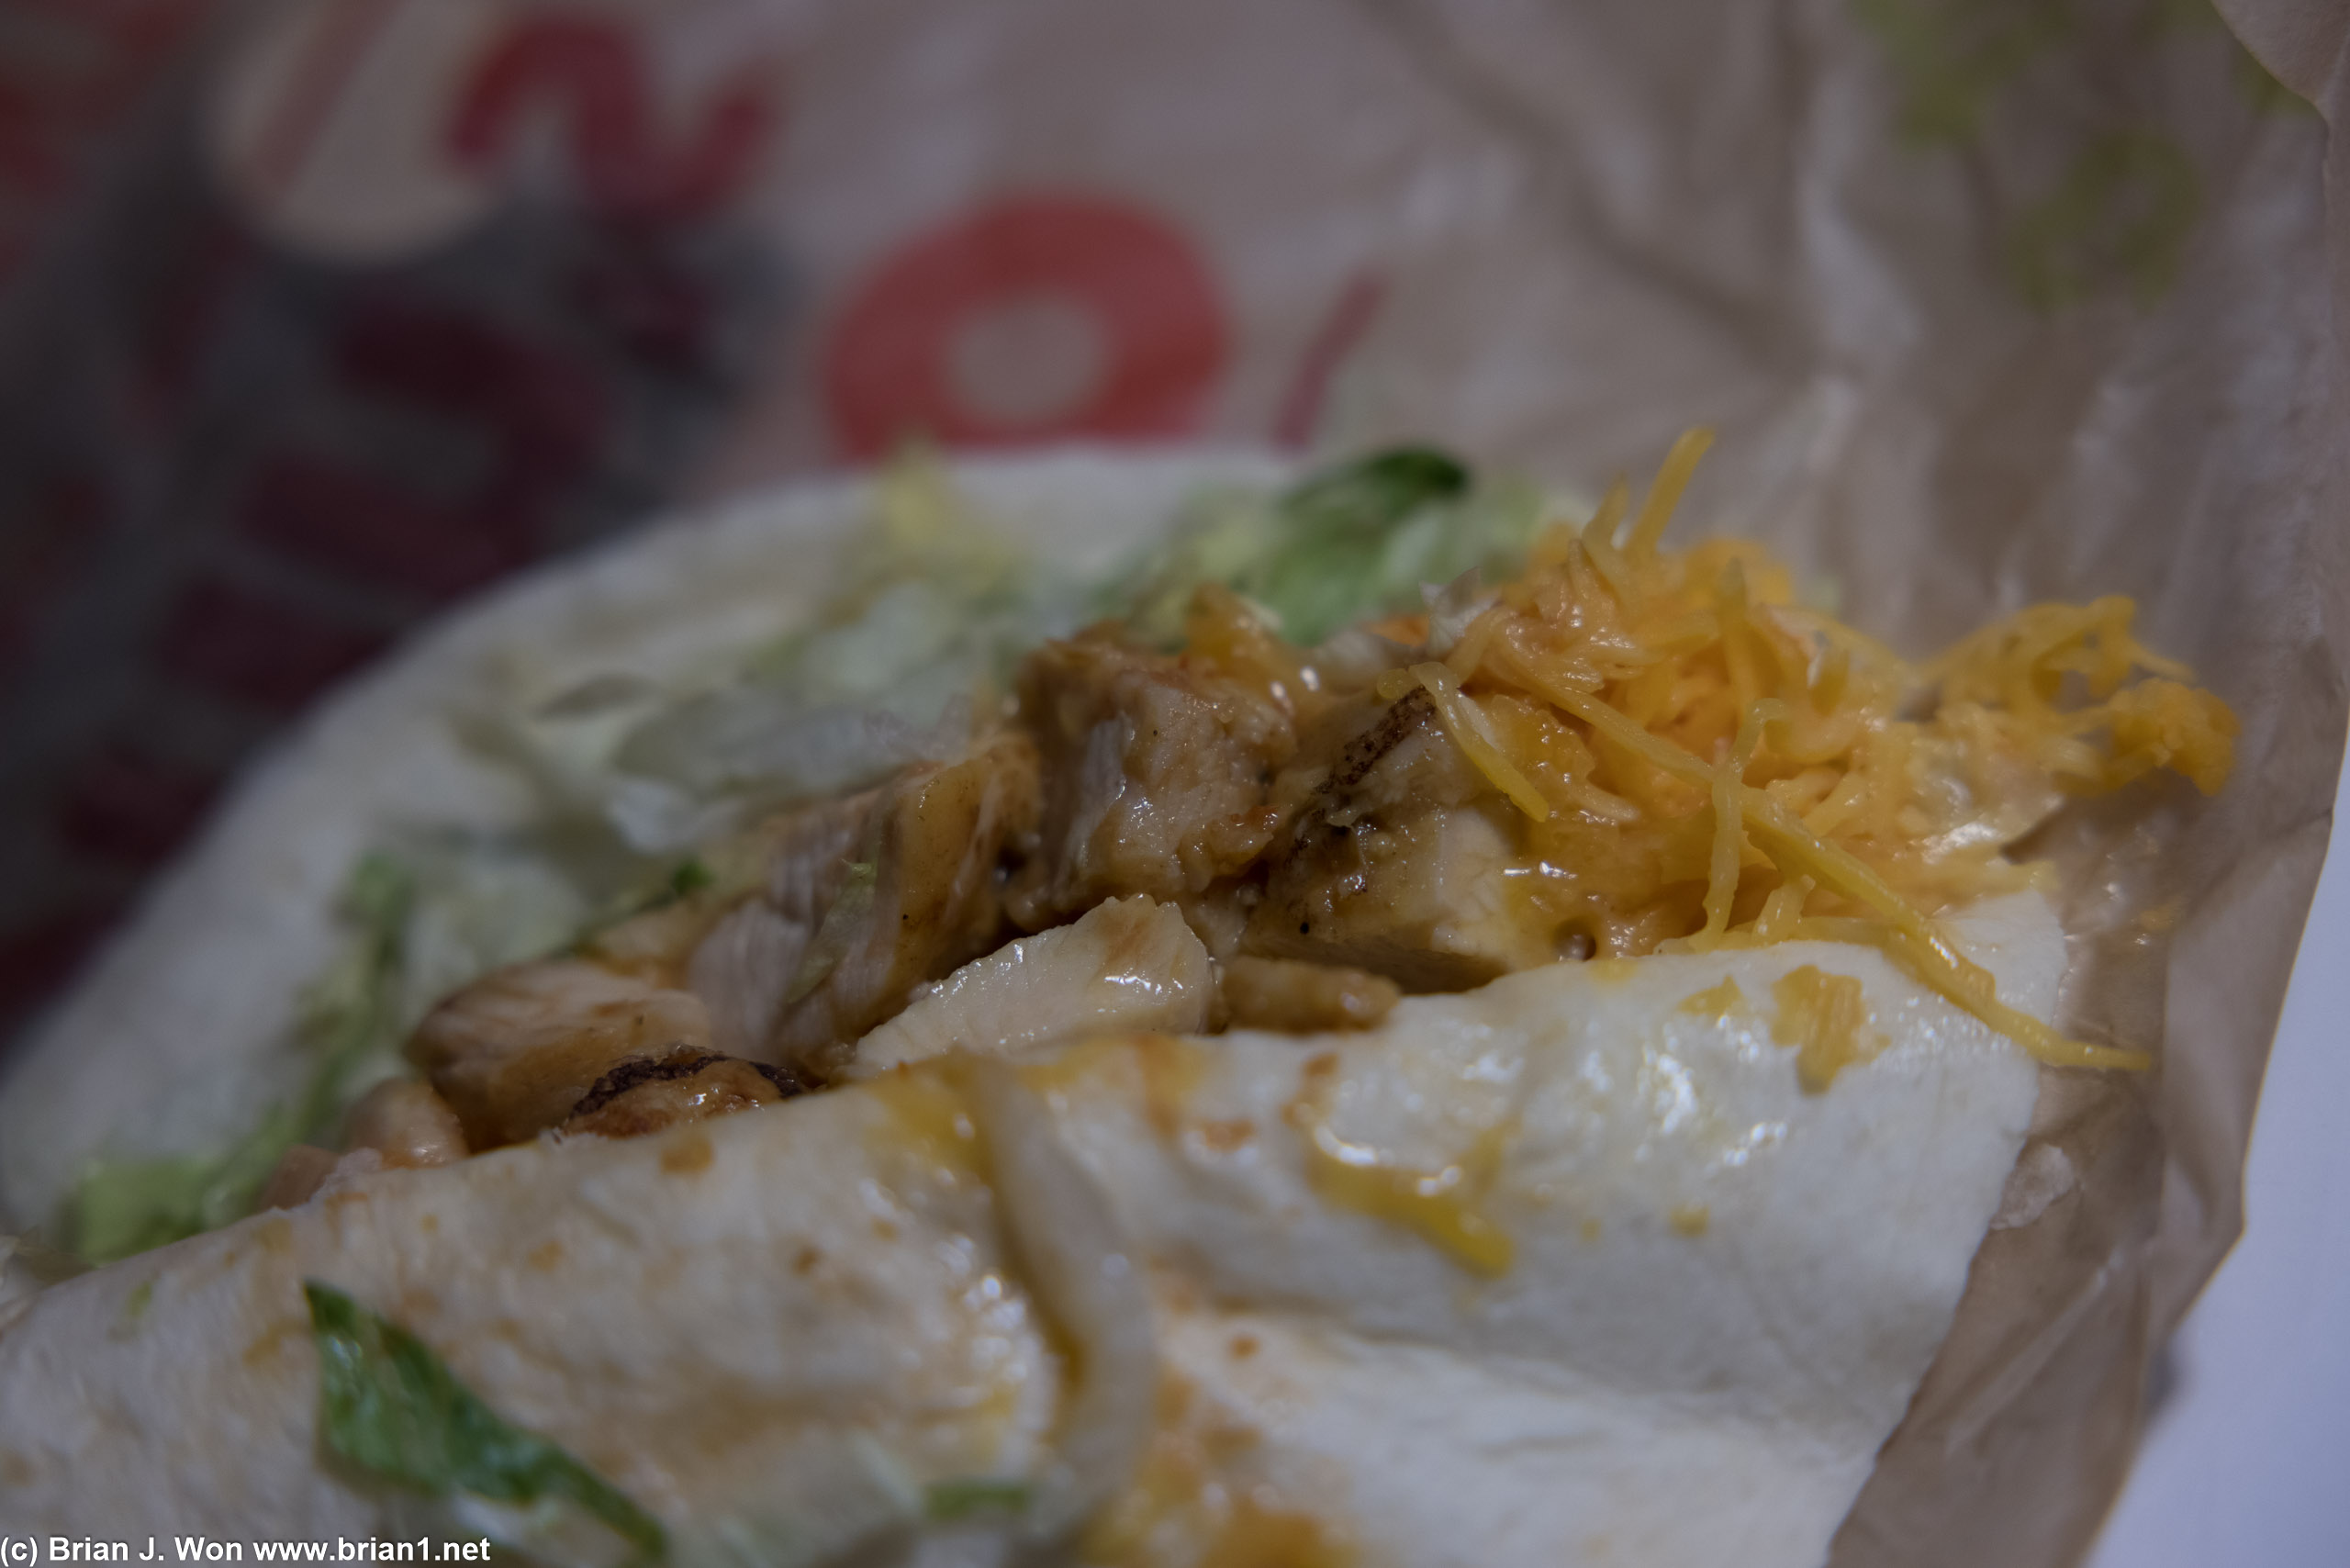 Chicken taco was better than the beef but still flavorless.